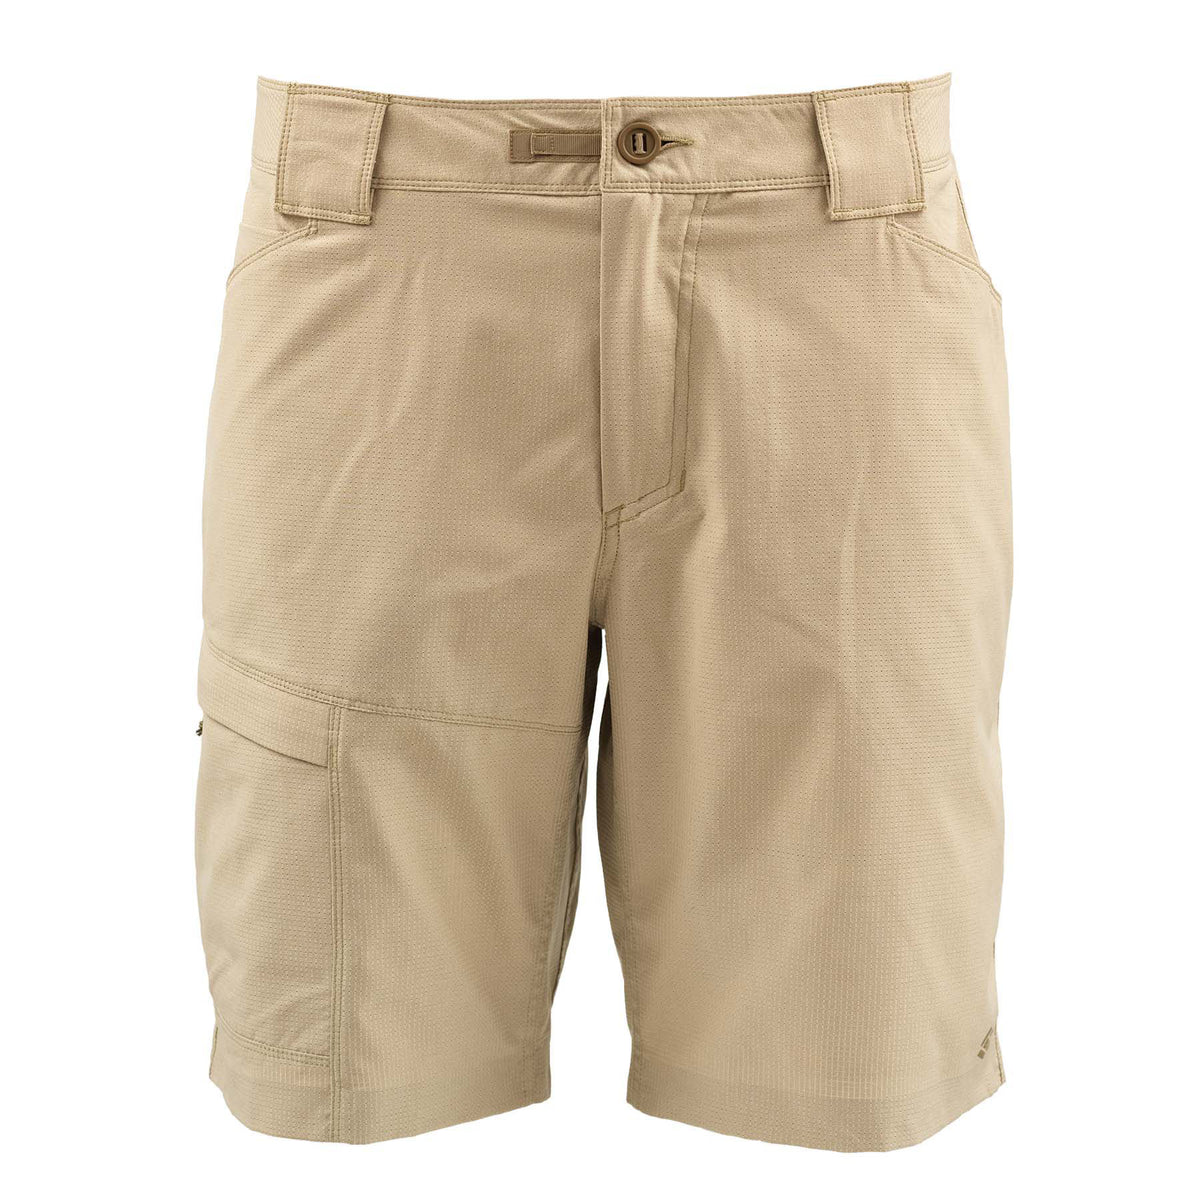 Skwala Sol Shorts - Fin & Fire Fly Shop